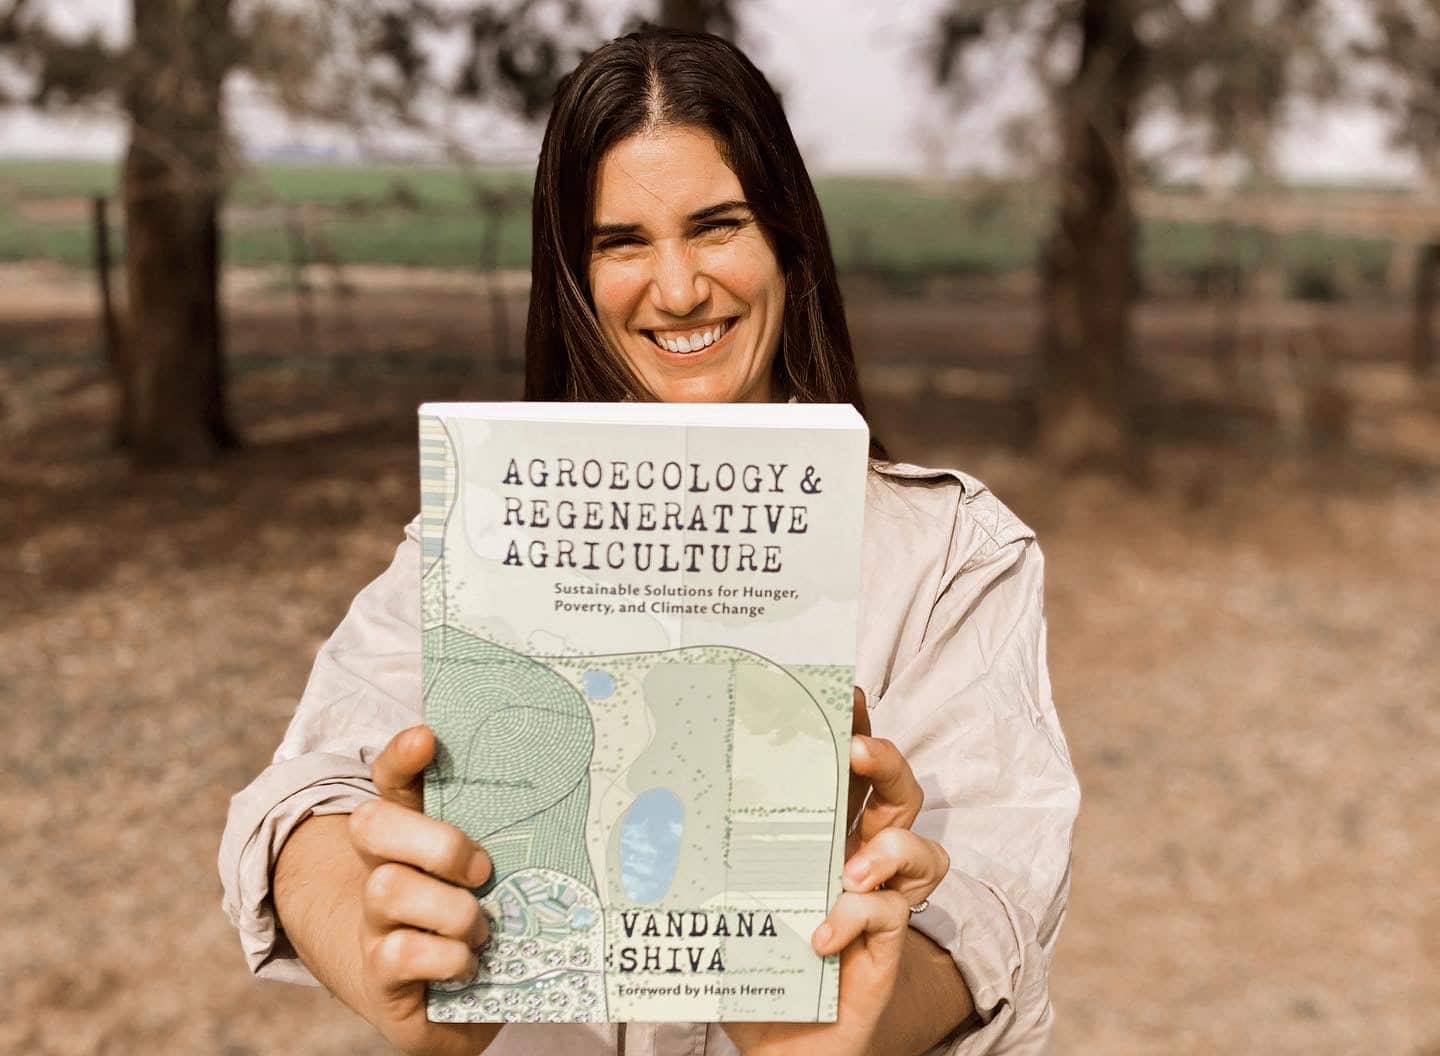 Leticia Pascual holding up Agroecology and Regenerative Agriculture